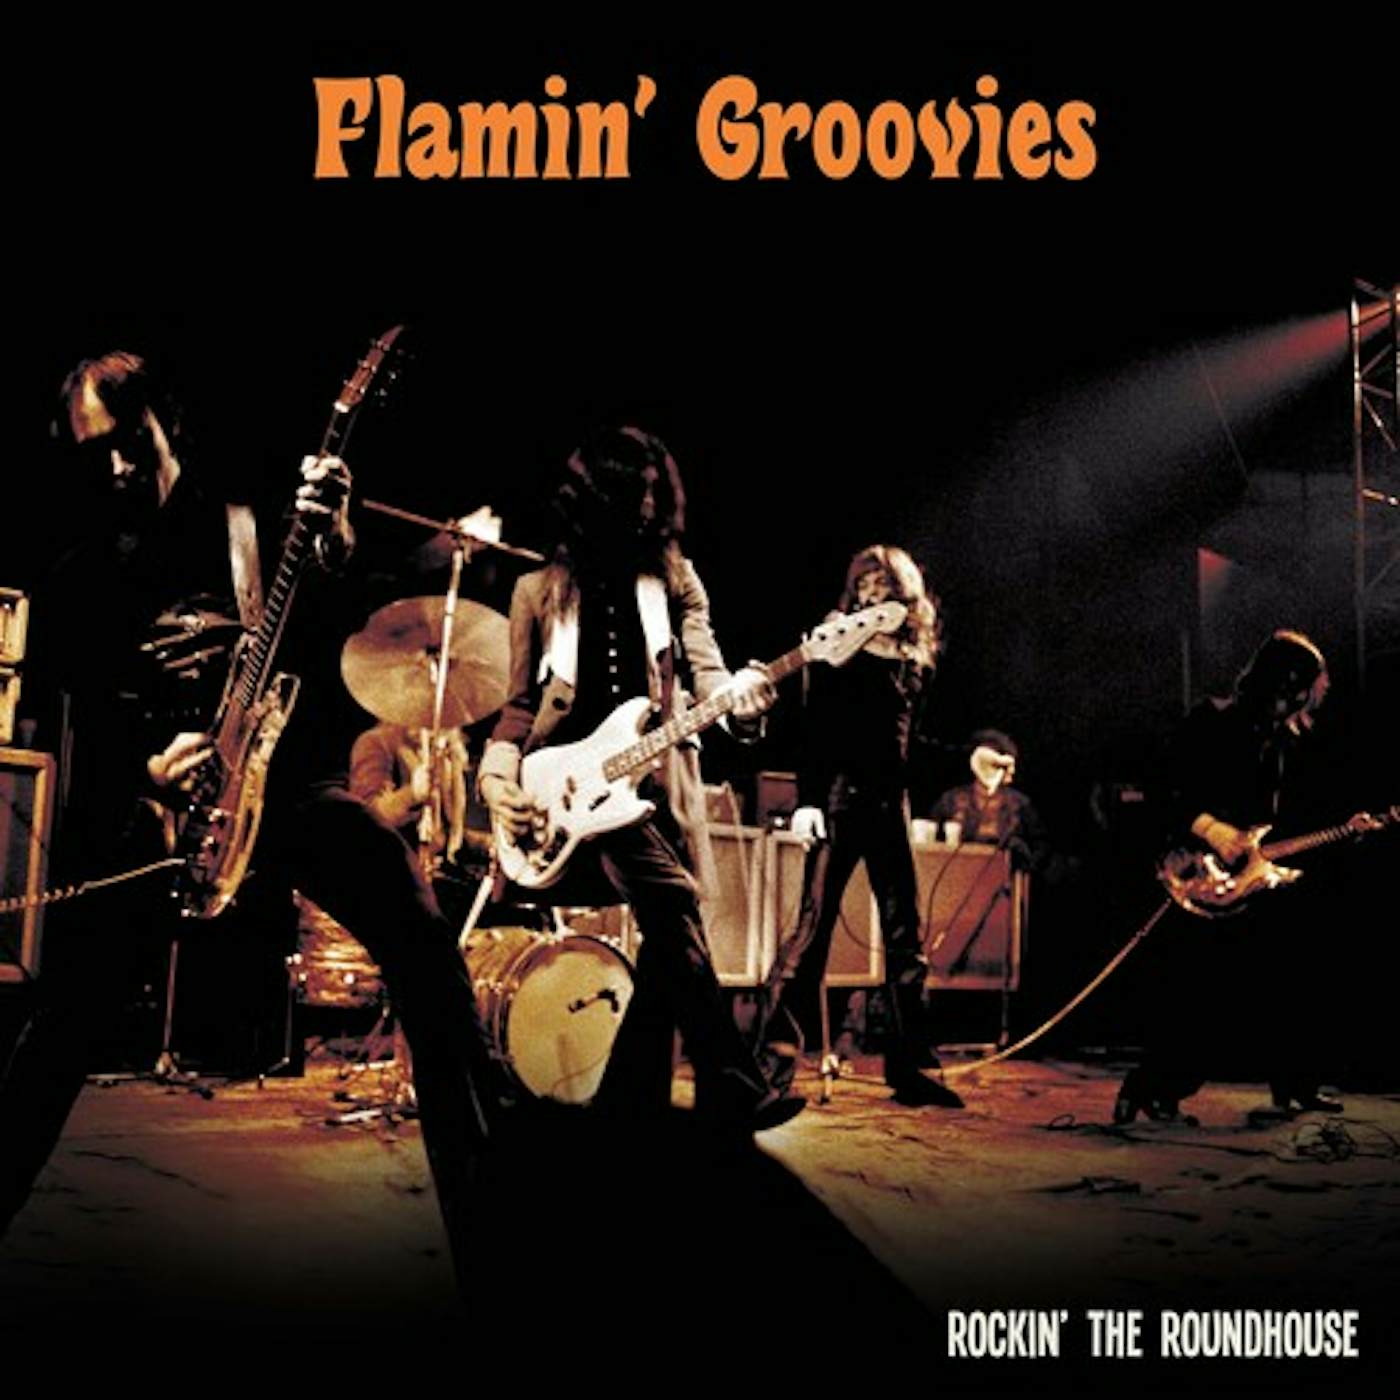 Flamin' Groovies ROCKIN' THE ROUNDHOUSE CD